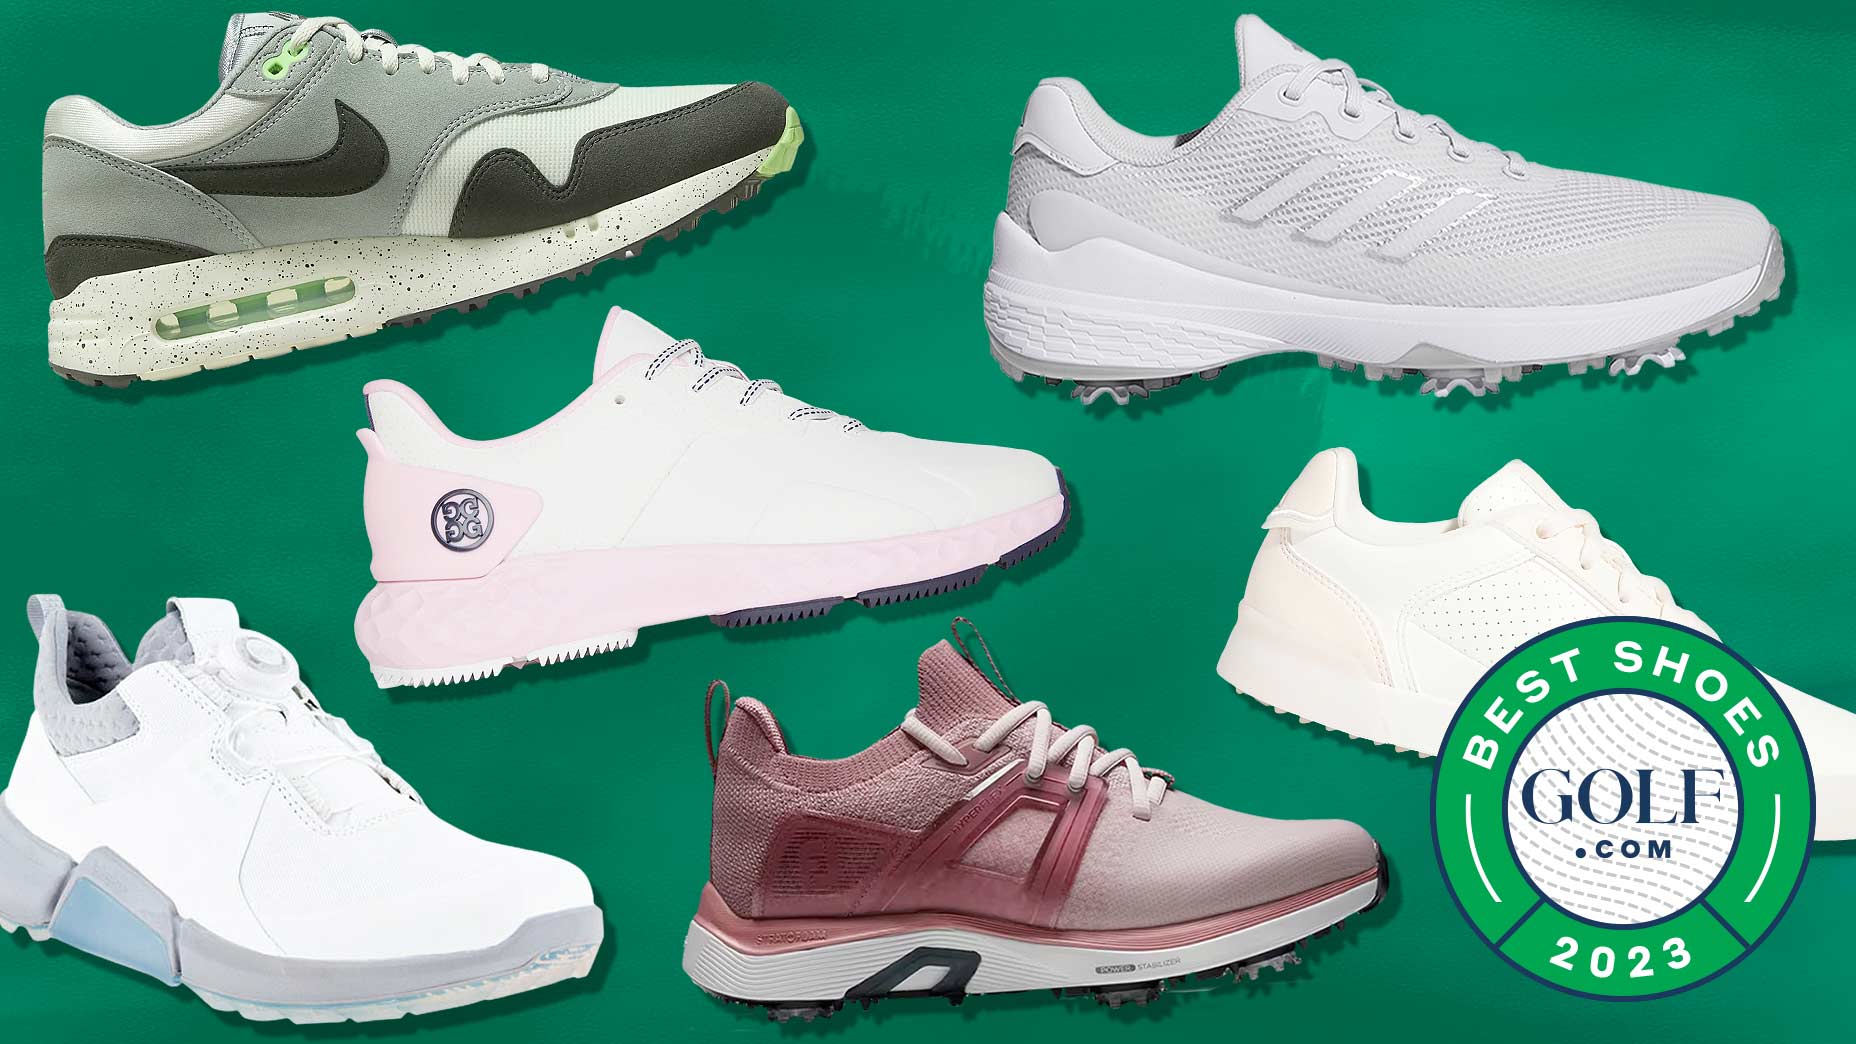 Best women's golf shoes of 2023: Our Picks